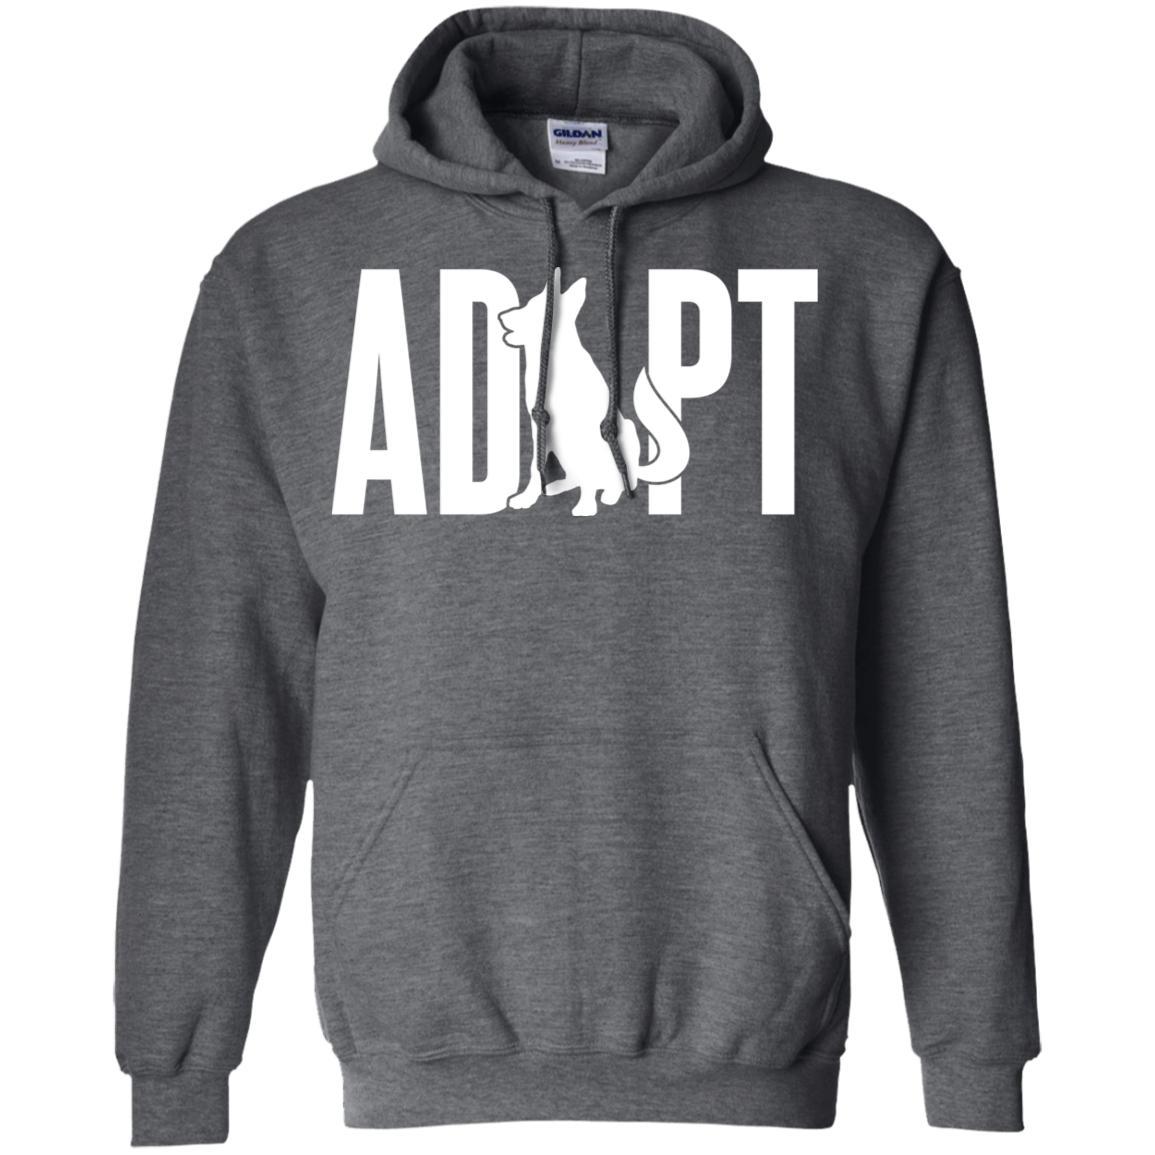 Adopt A Dog Pullover Hoodie For Men – Oh my Glad